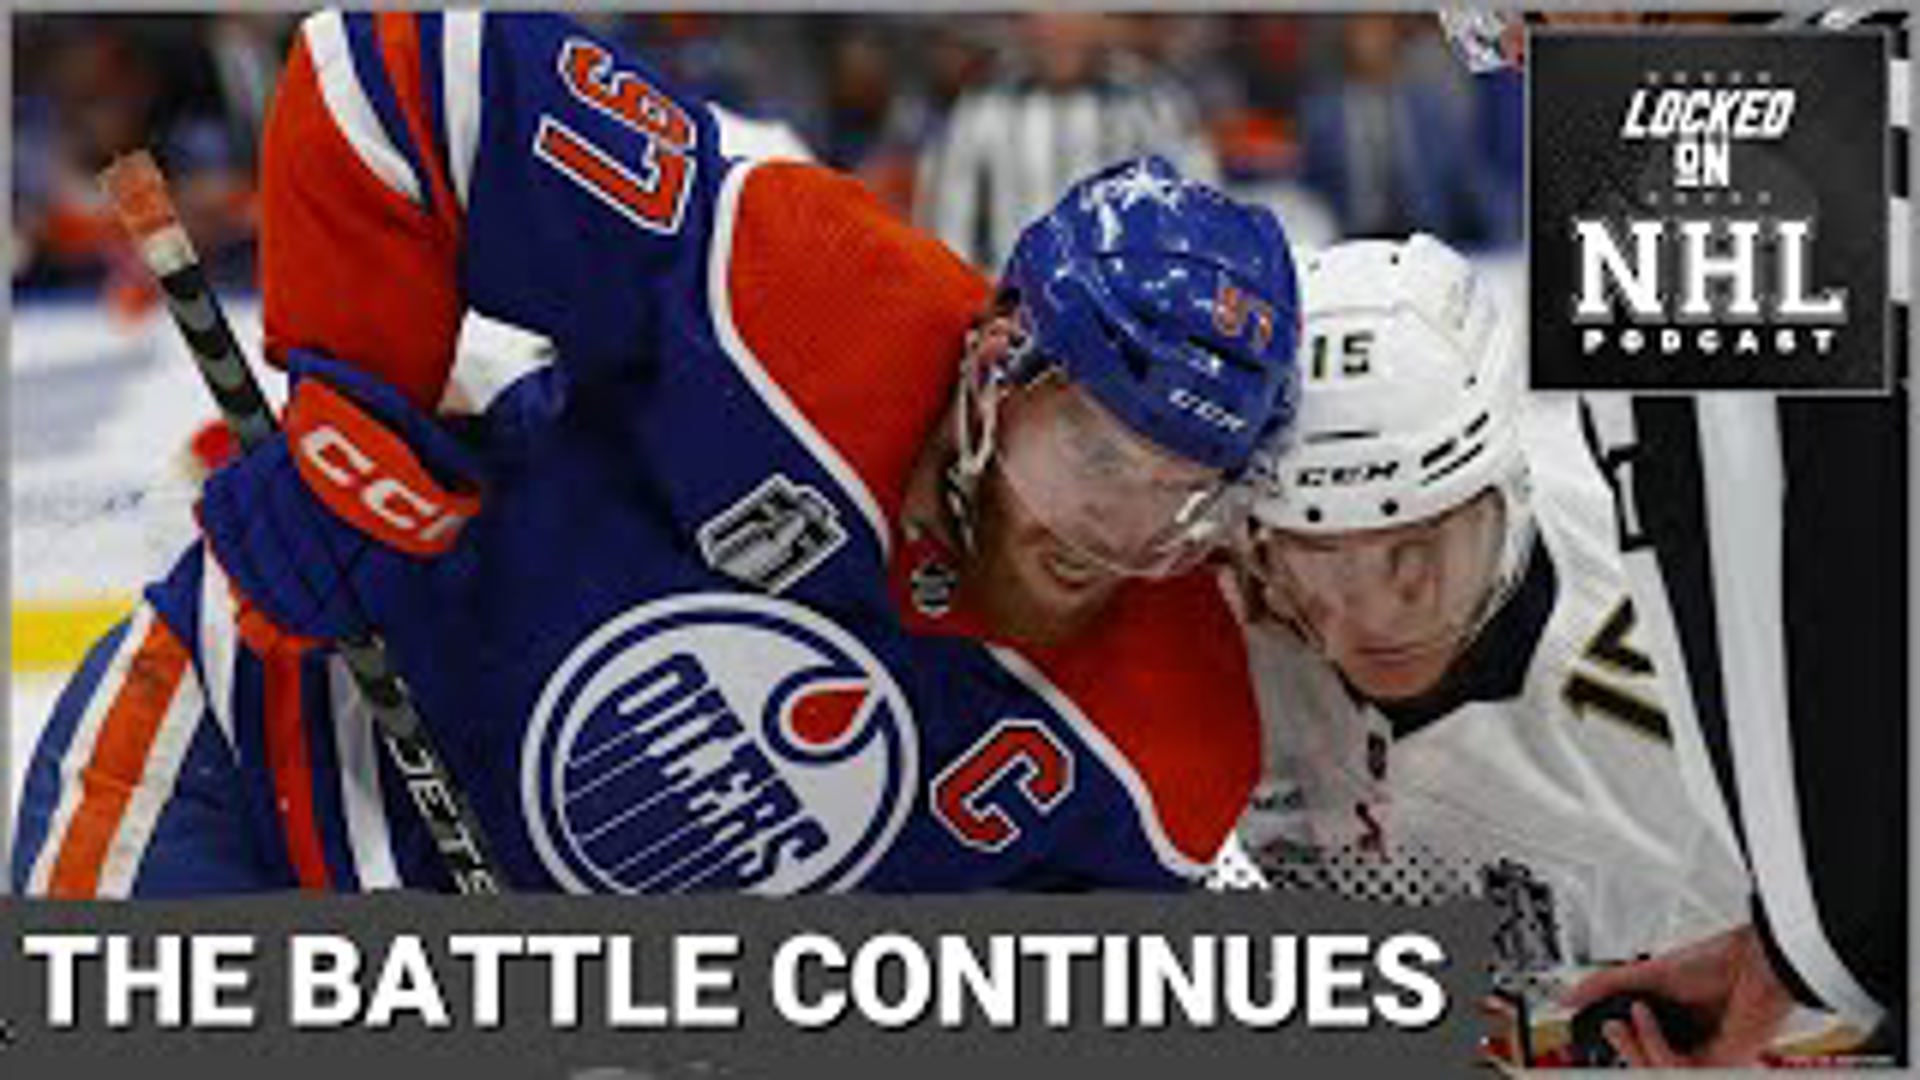 The Edmonton Oilers stayed alive with an 8-1 blowout win over the Florida Panthers in Game 4 of the Stanley Cup Finals led by Connor McDavid.